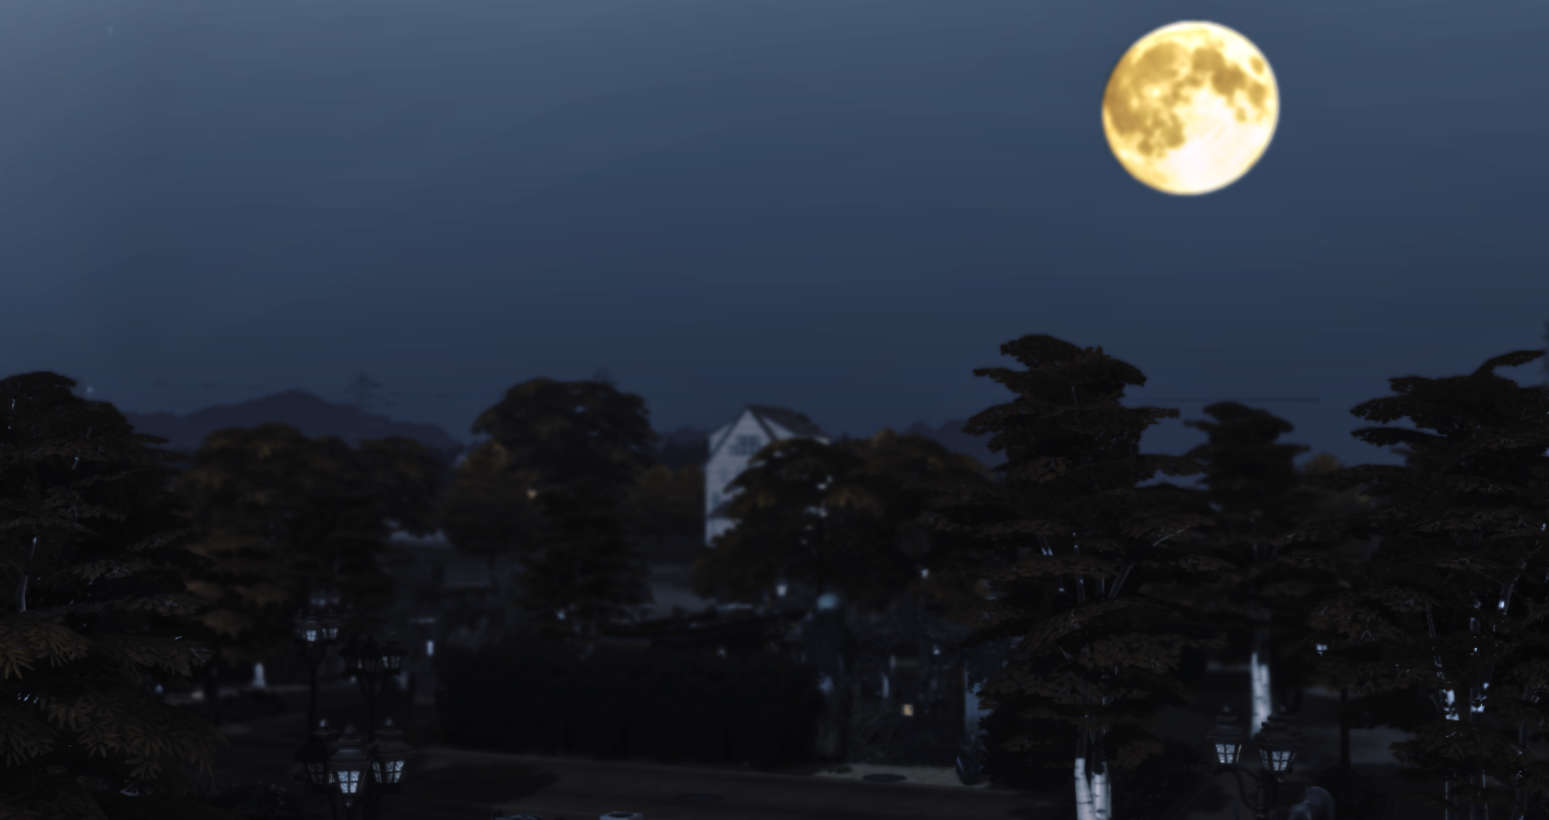 Sims 4: Werewolves Game Pack trailer set for release